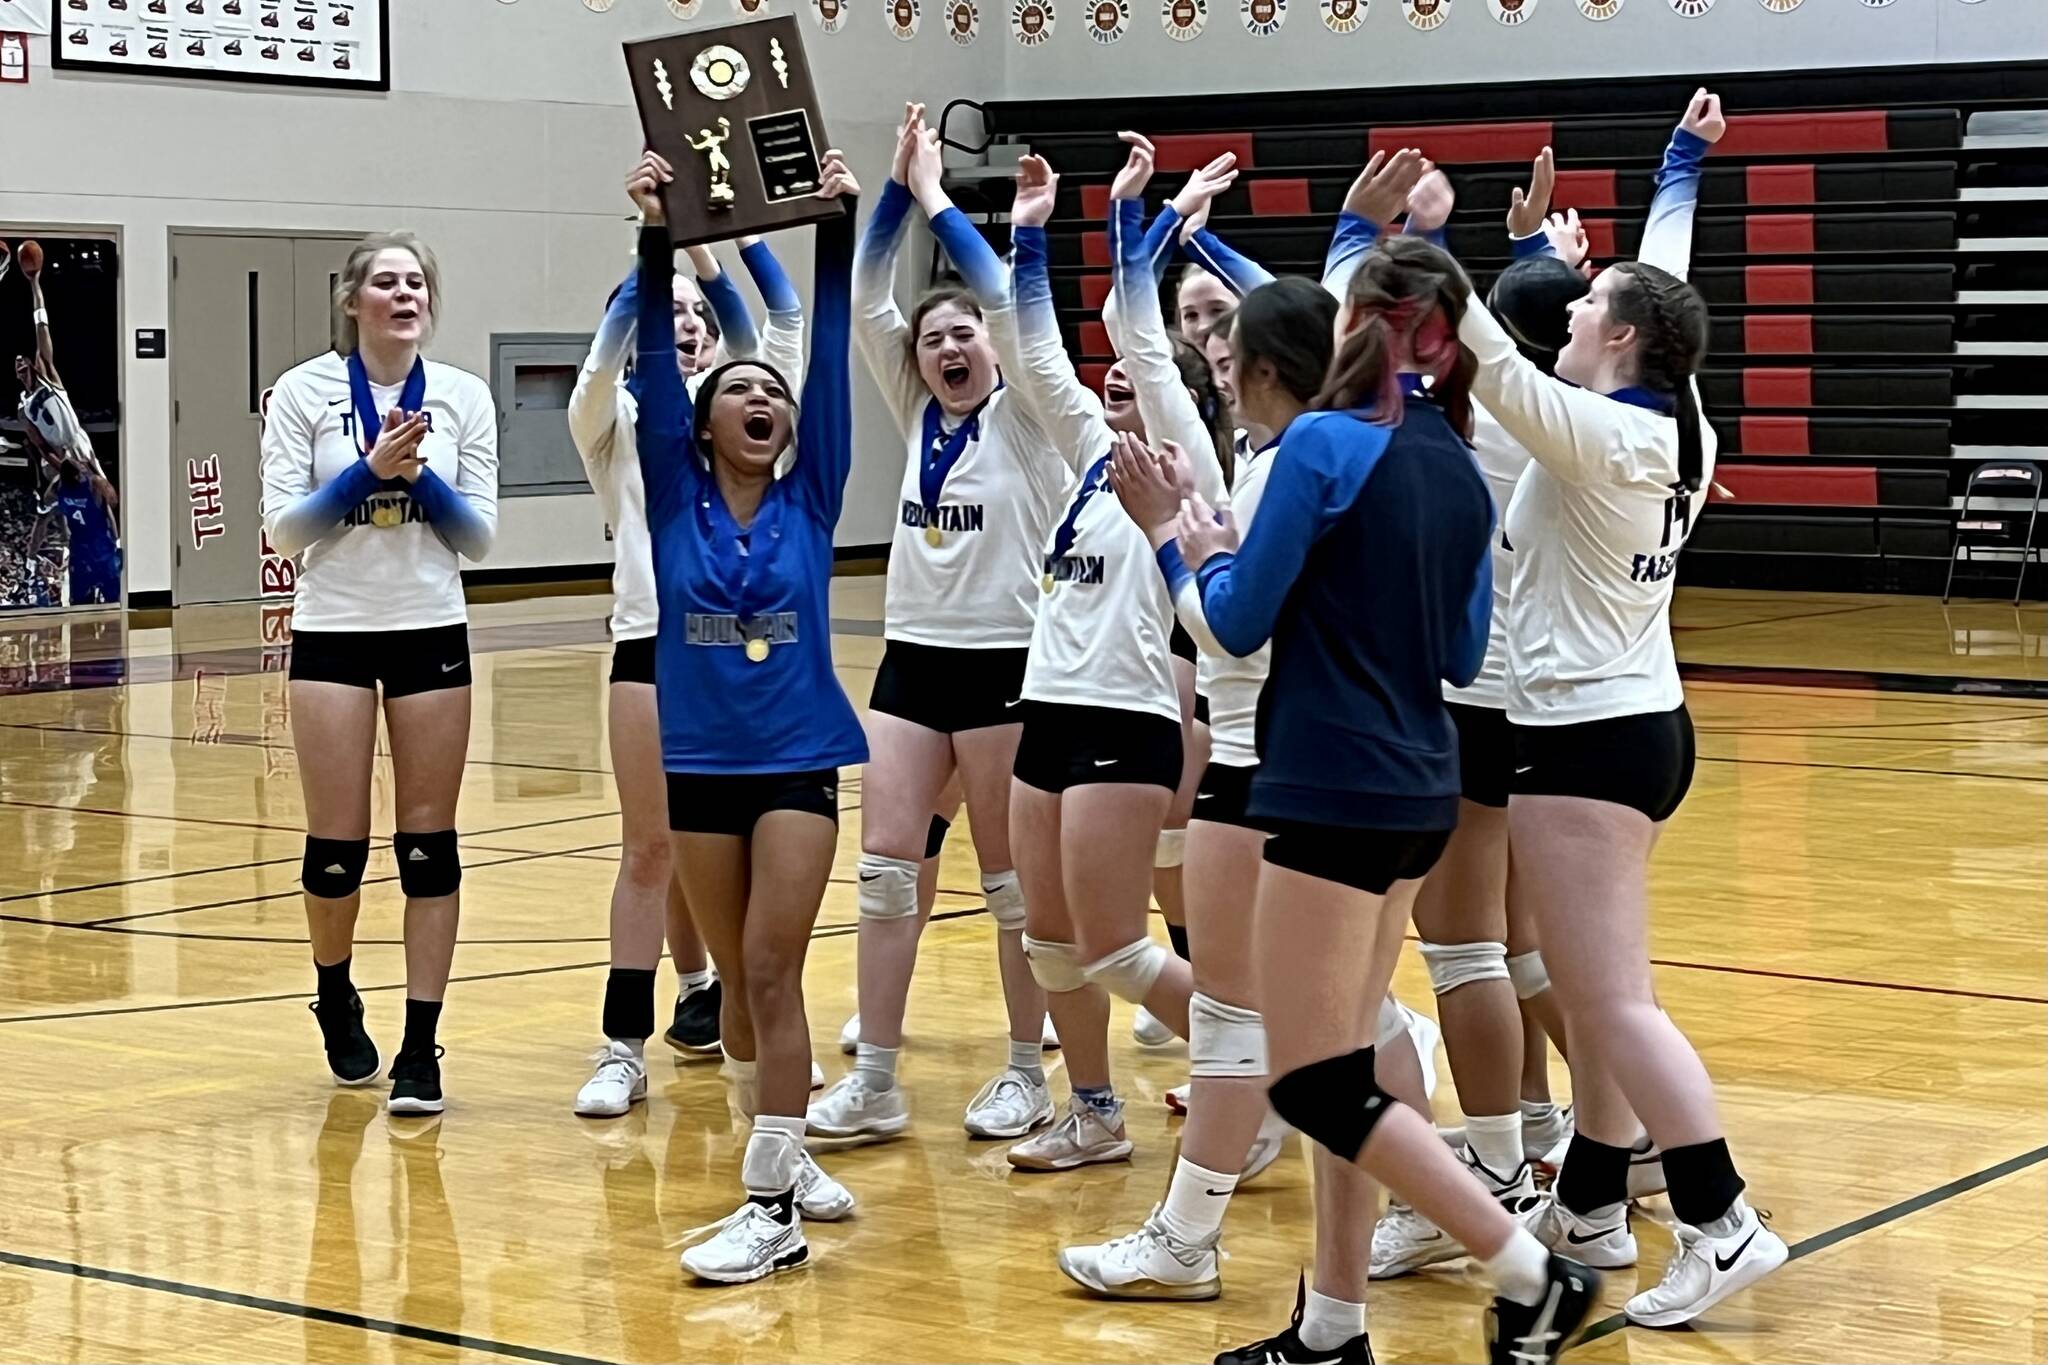 Thunder Mountain girls varsity volleyball team celebrates their championship victory against JDHS on Saturday. TMHS now heads to the state tournament in Anchorage to face Colony in the first round on Thursday. (Jonson Kuhn / Juneau Empire)